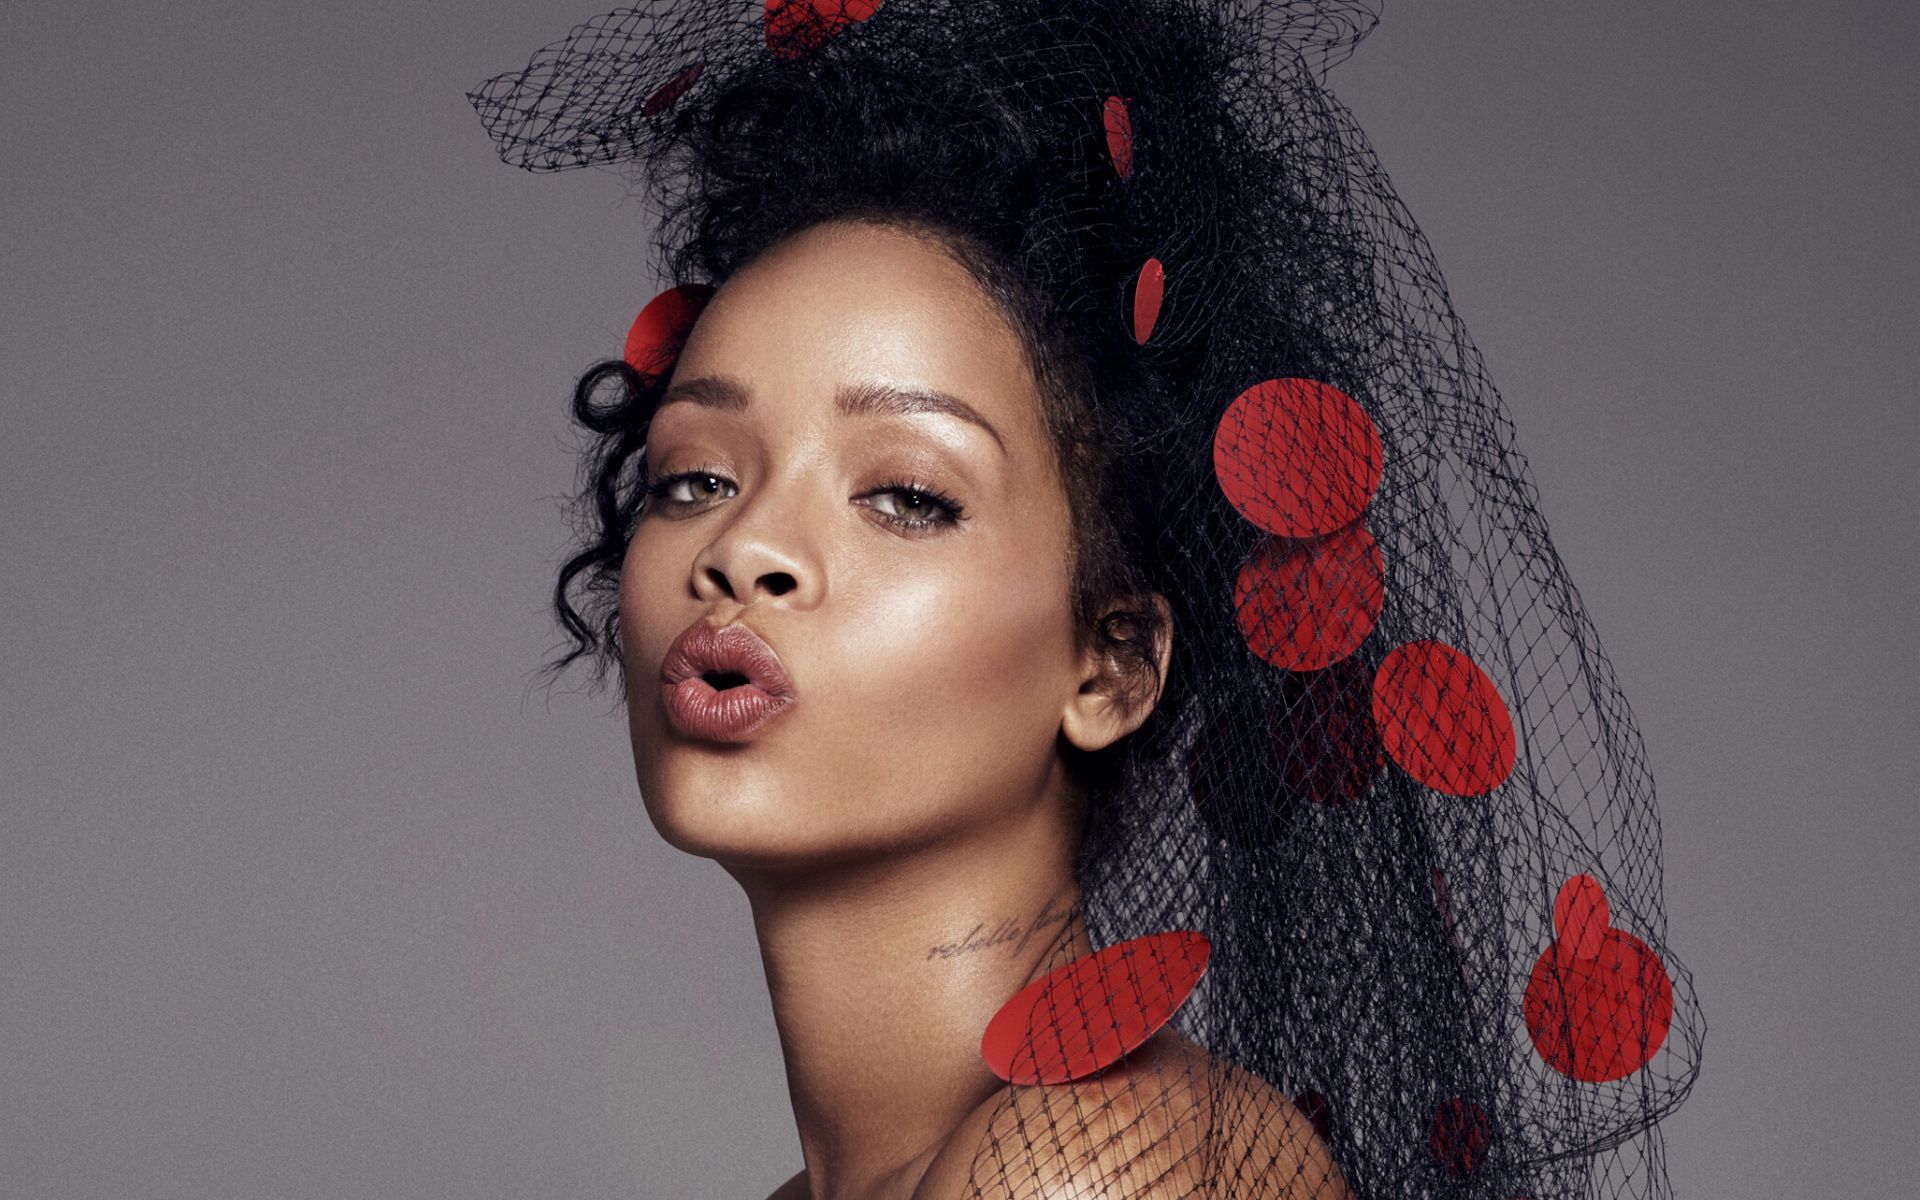 Rihanna 4K wallpaper for your desktop or mobile screen free and easy to download